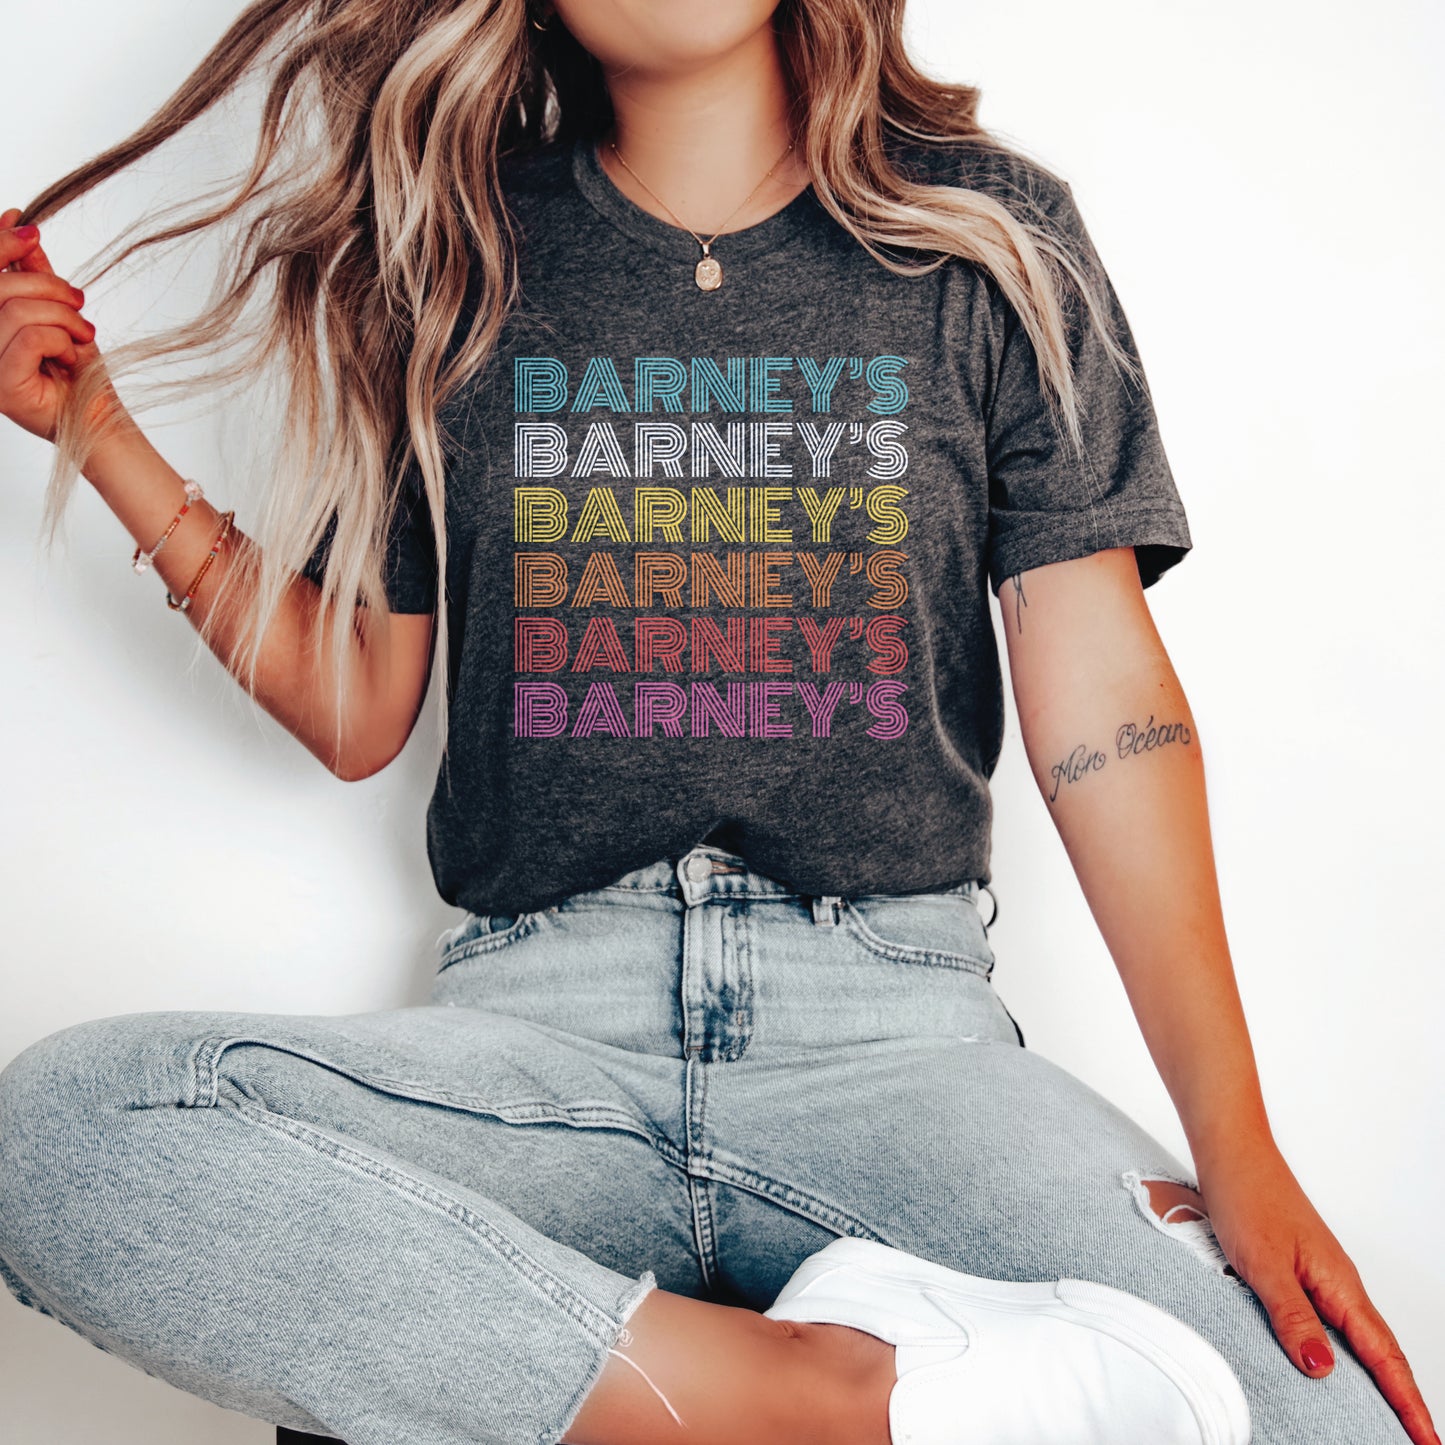 Barney's x6 Retro Hollywood | BARNEY'S BEANERY - Women's Retro Graphic Tee | Dark Grey Heather Bella+Canvas 3001 T-Shirt - Big Graphic On Front View Of Female Lifestyle Image